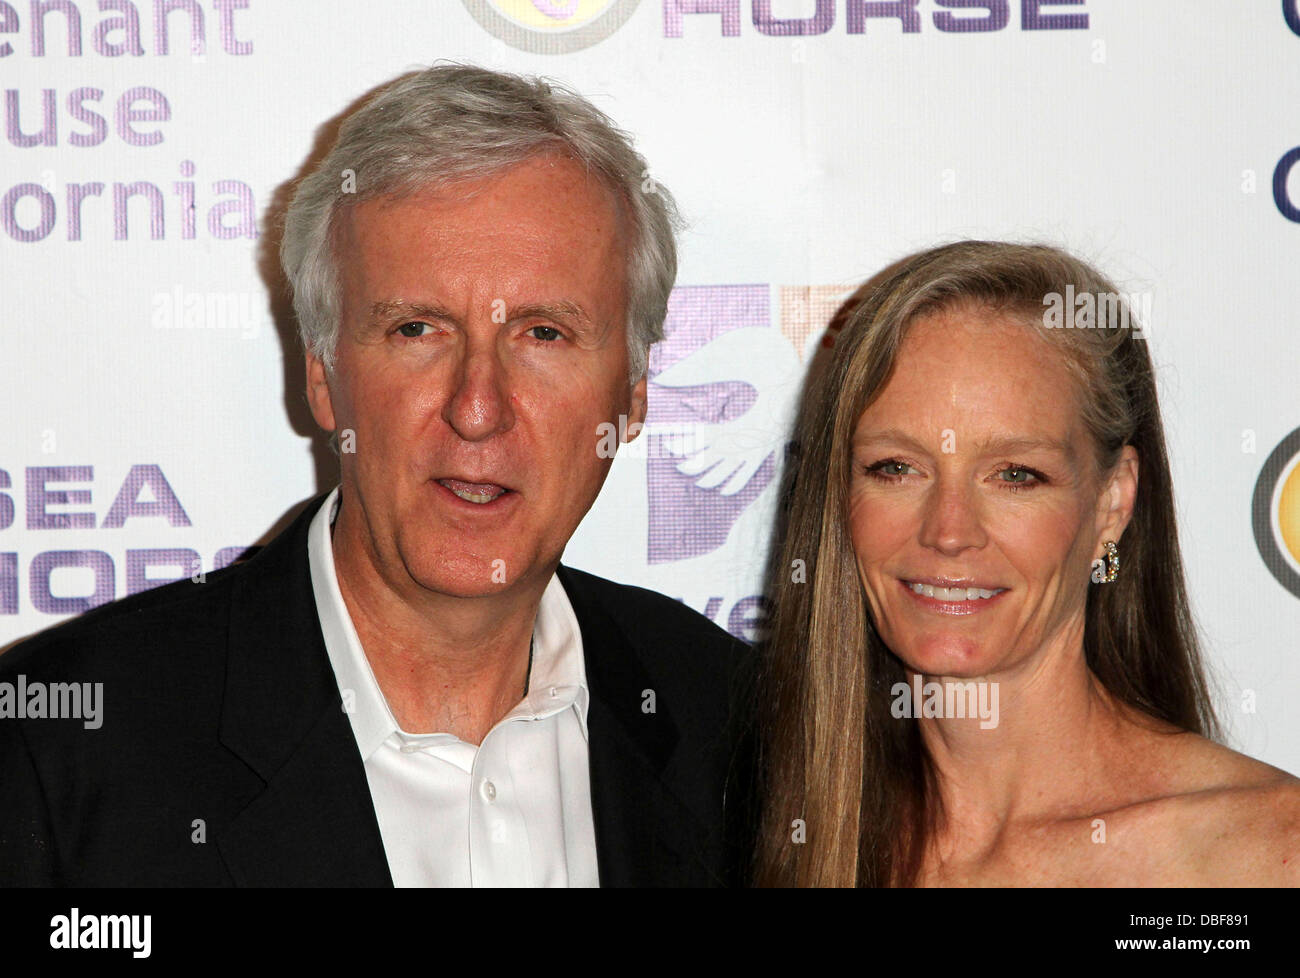 James Cameron and Suzy Amis Cameron Covenant House 2011 Gala and Awards Dinner held at Skirball Cultural Center Los Angeles, California - 09.06.11 Stock Photo